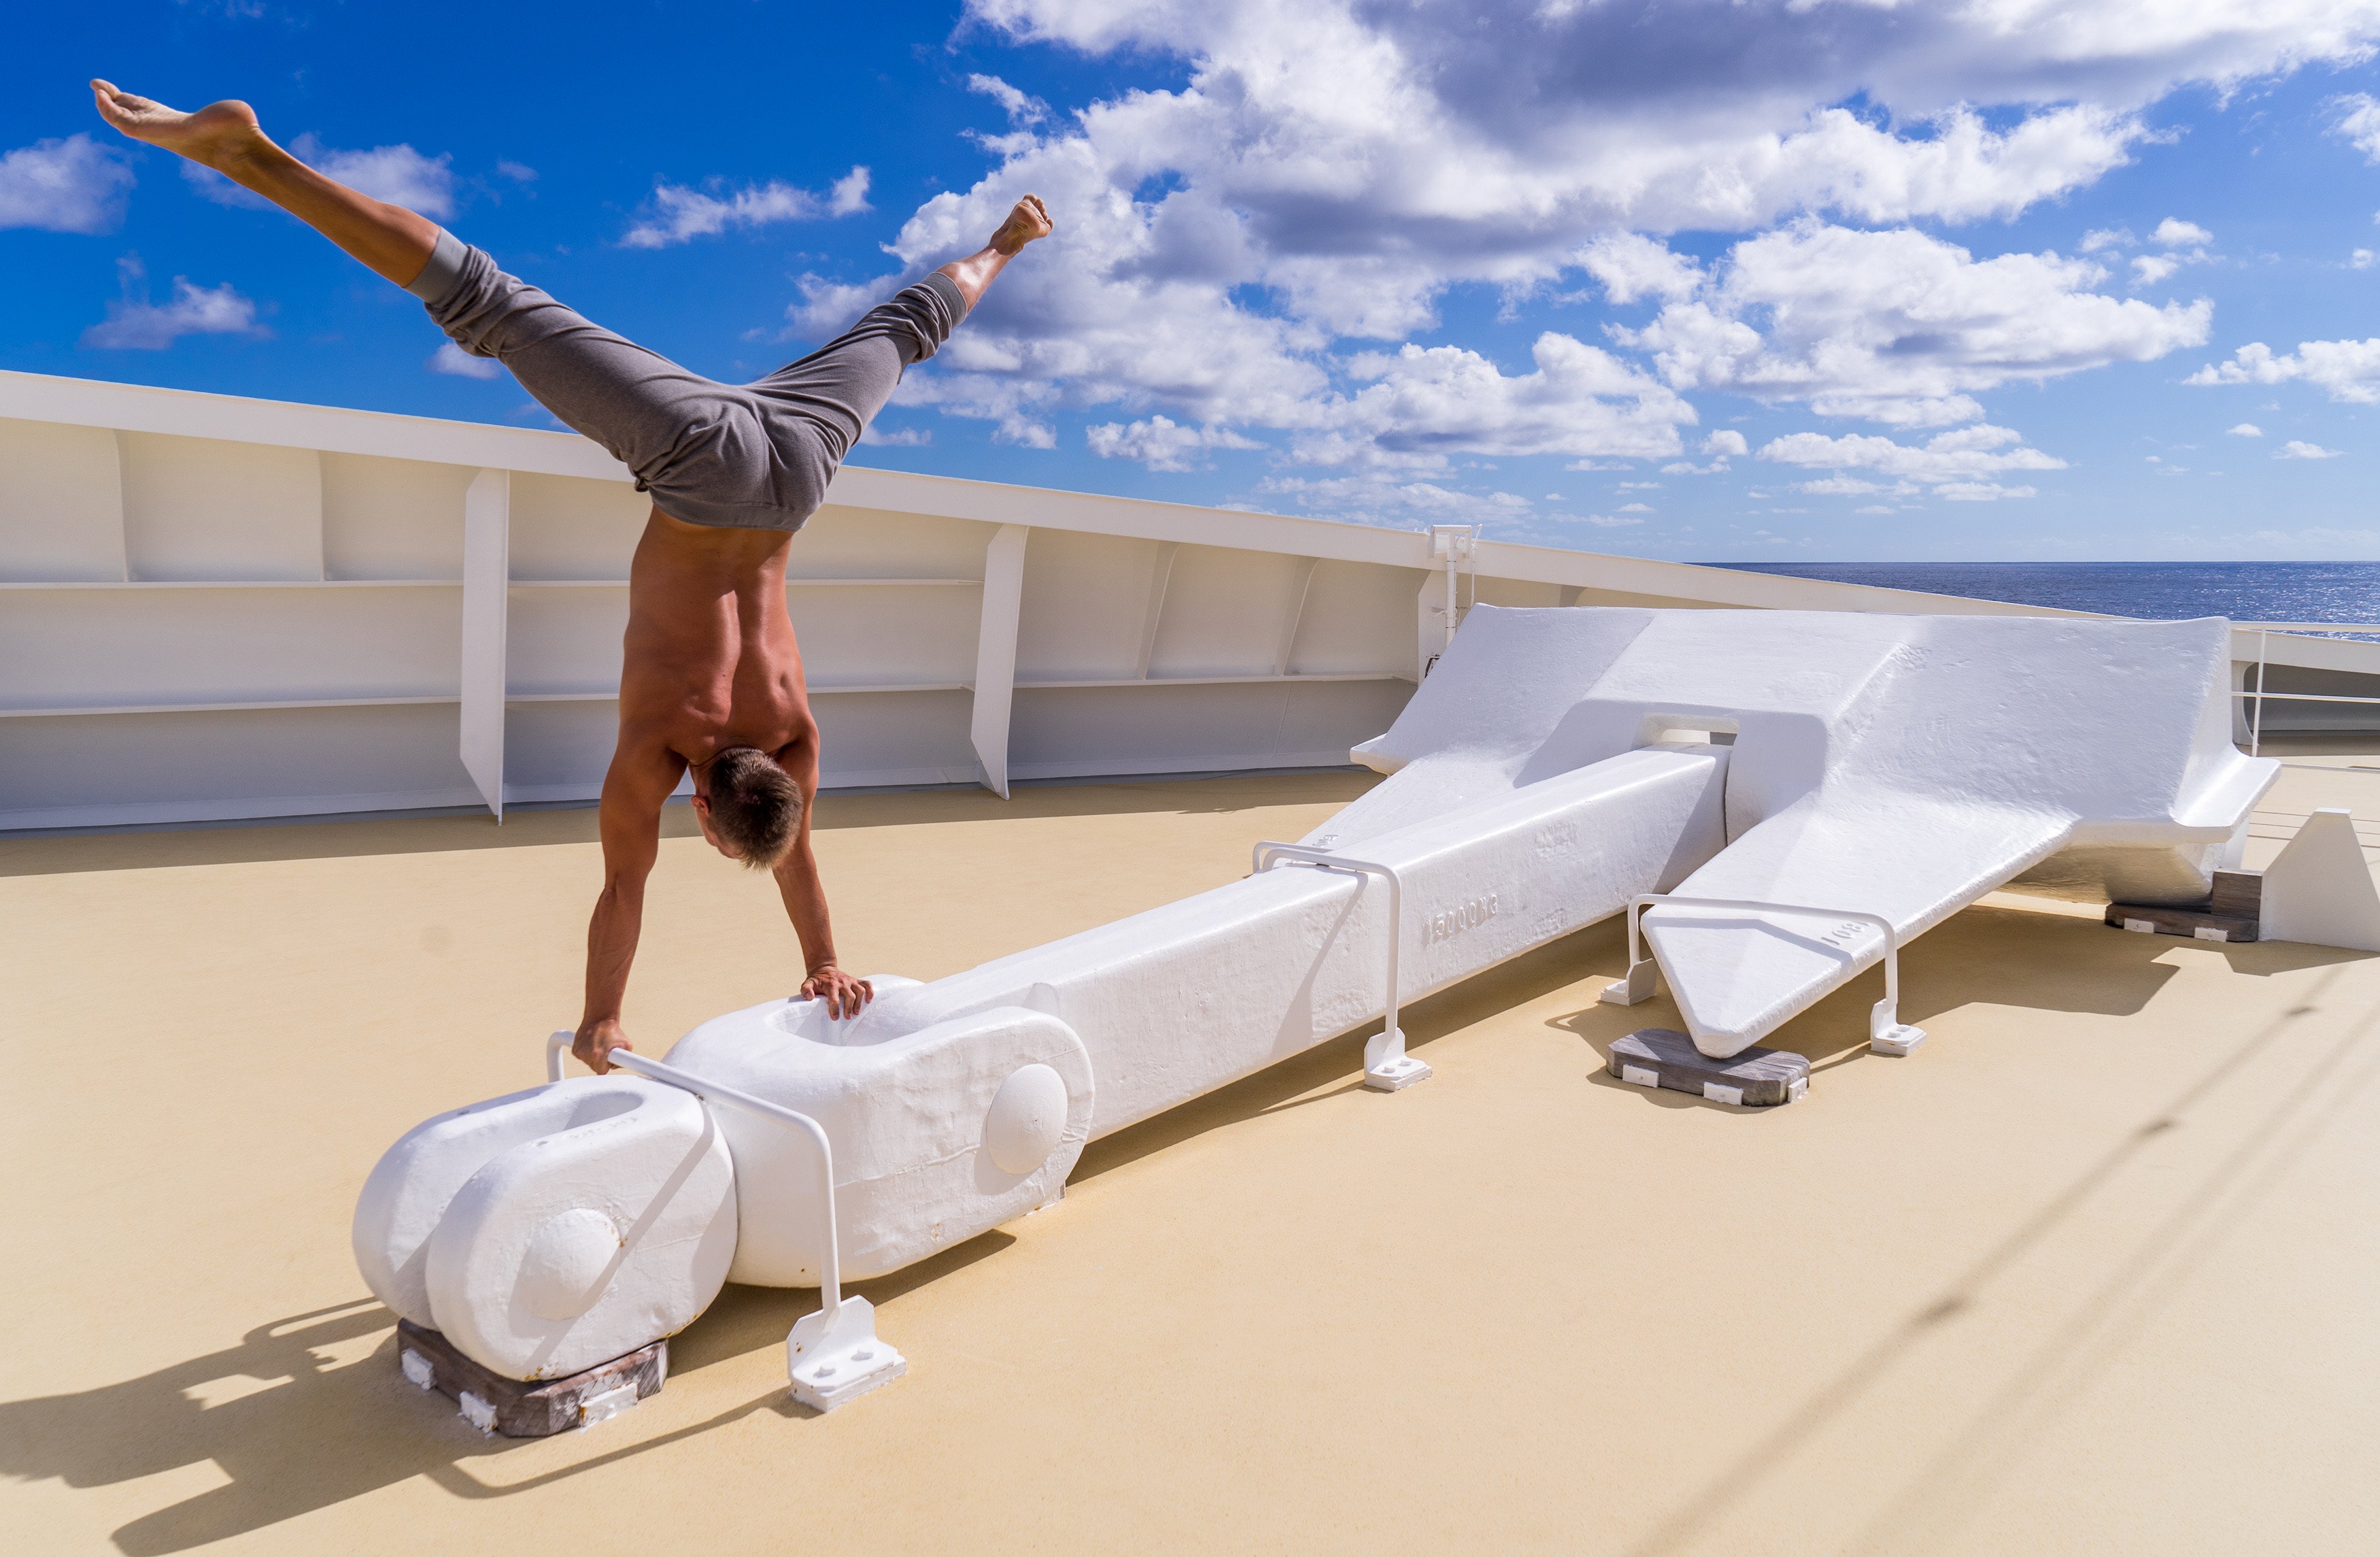 Going on a cruise has multiple physical, mental and social benefits, research shows. As cruise companies prepare to relaunch their fleets with a new focus on health and wellness, two residential superyachts you can live aboard for months at a time are nearing completion. Photo: Shutterstock